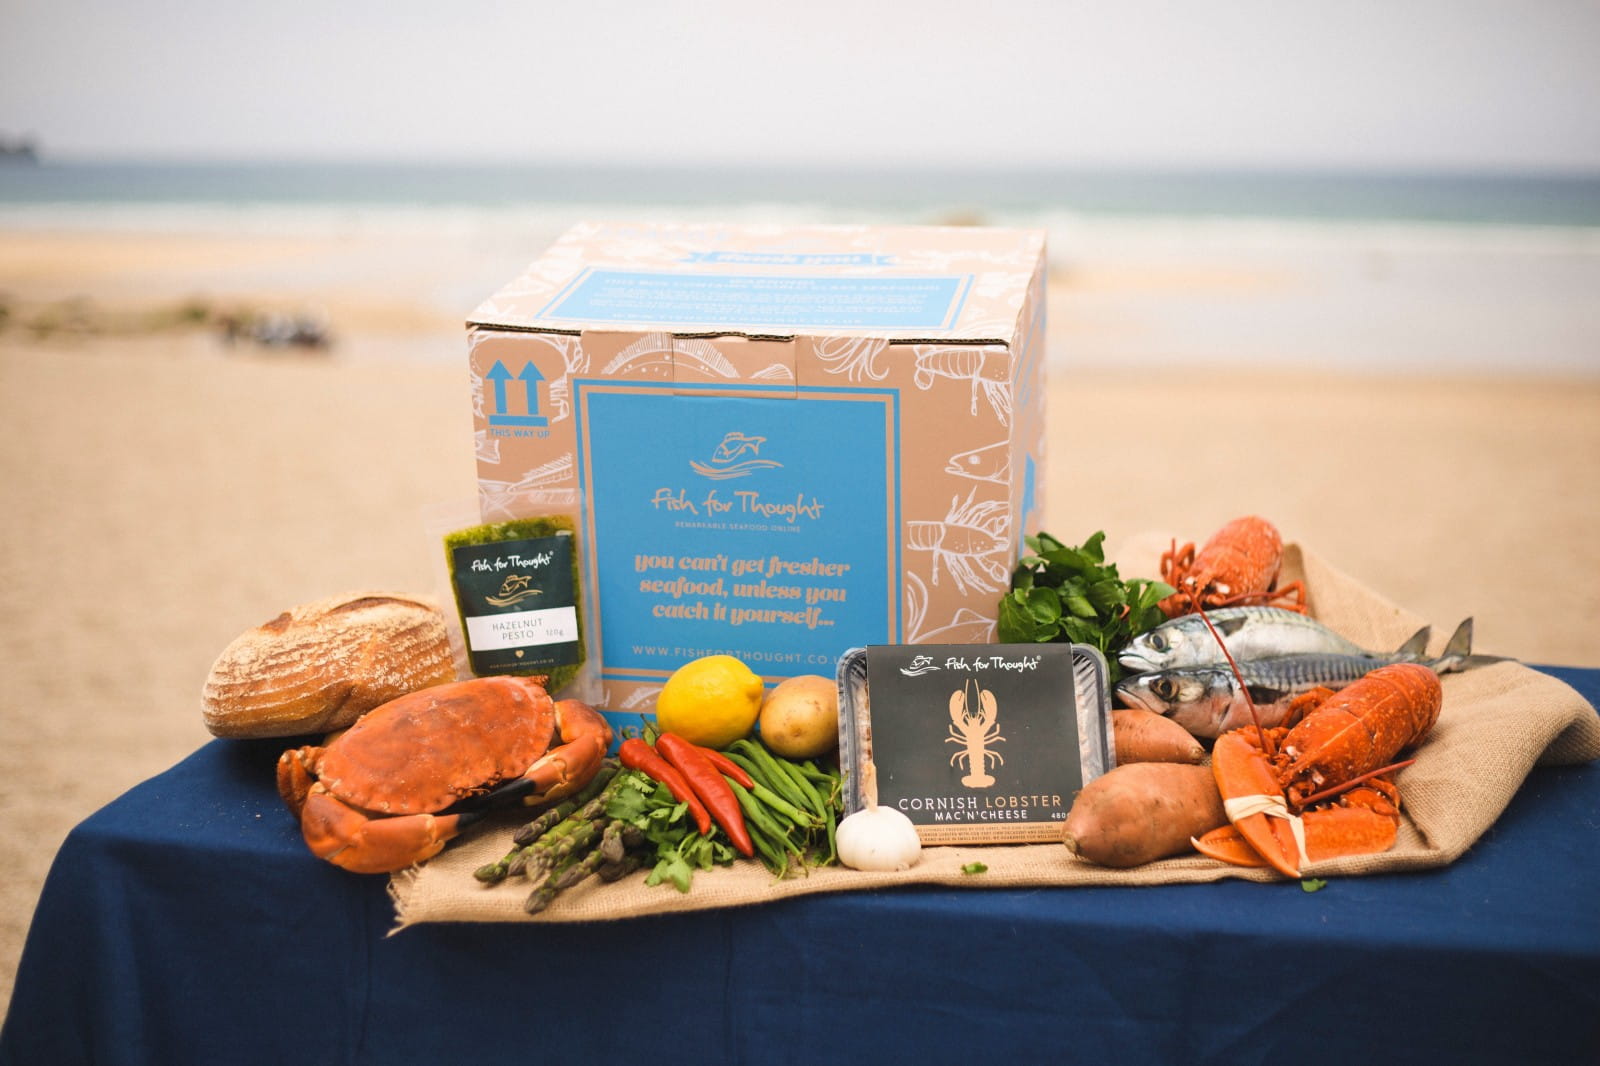 Win a Fish for Thought Seafood Recipe Box